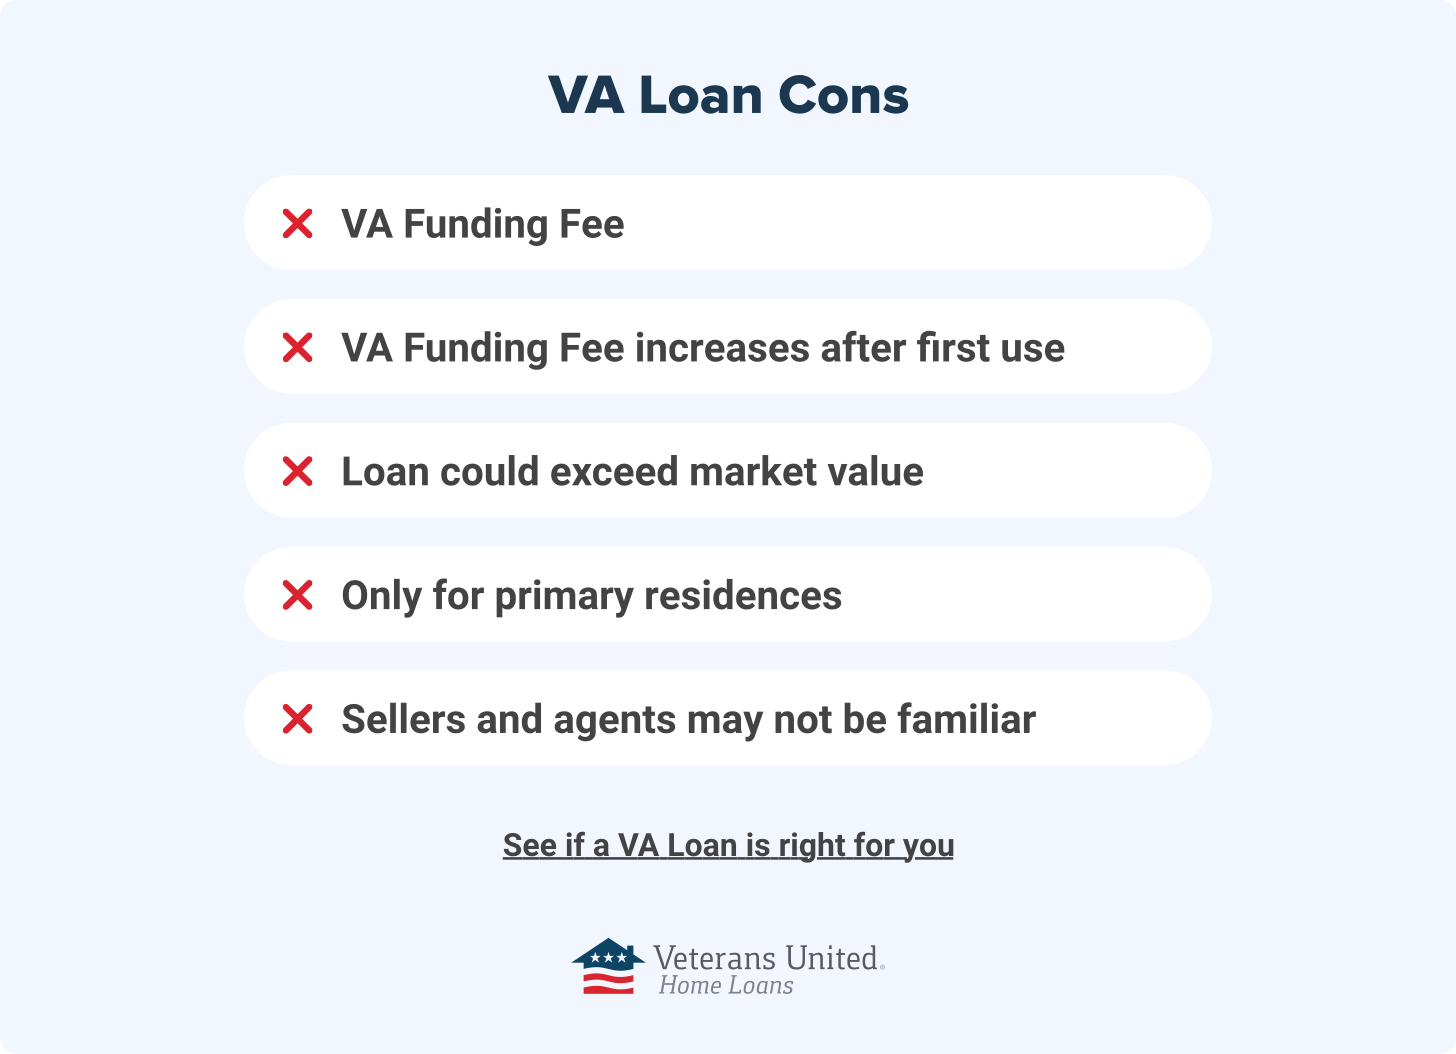 VA loan cons include the funding fee increase, loans potentially exceeding market value, and exclusive to primary residences.